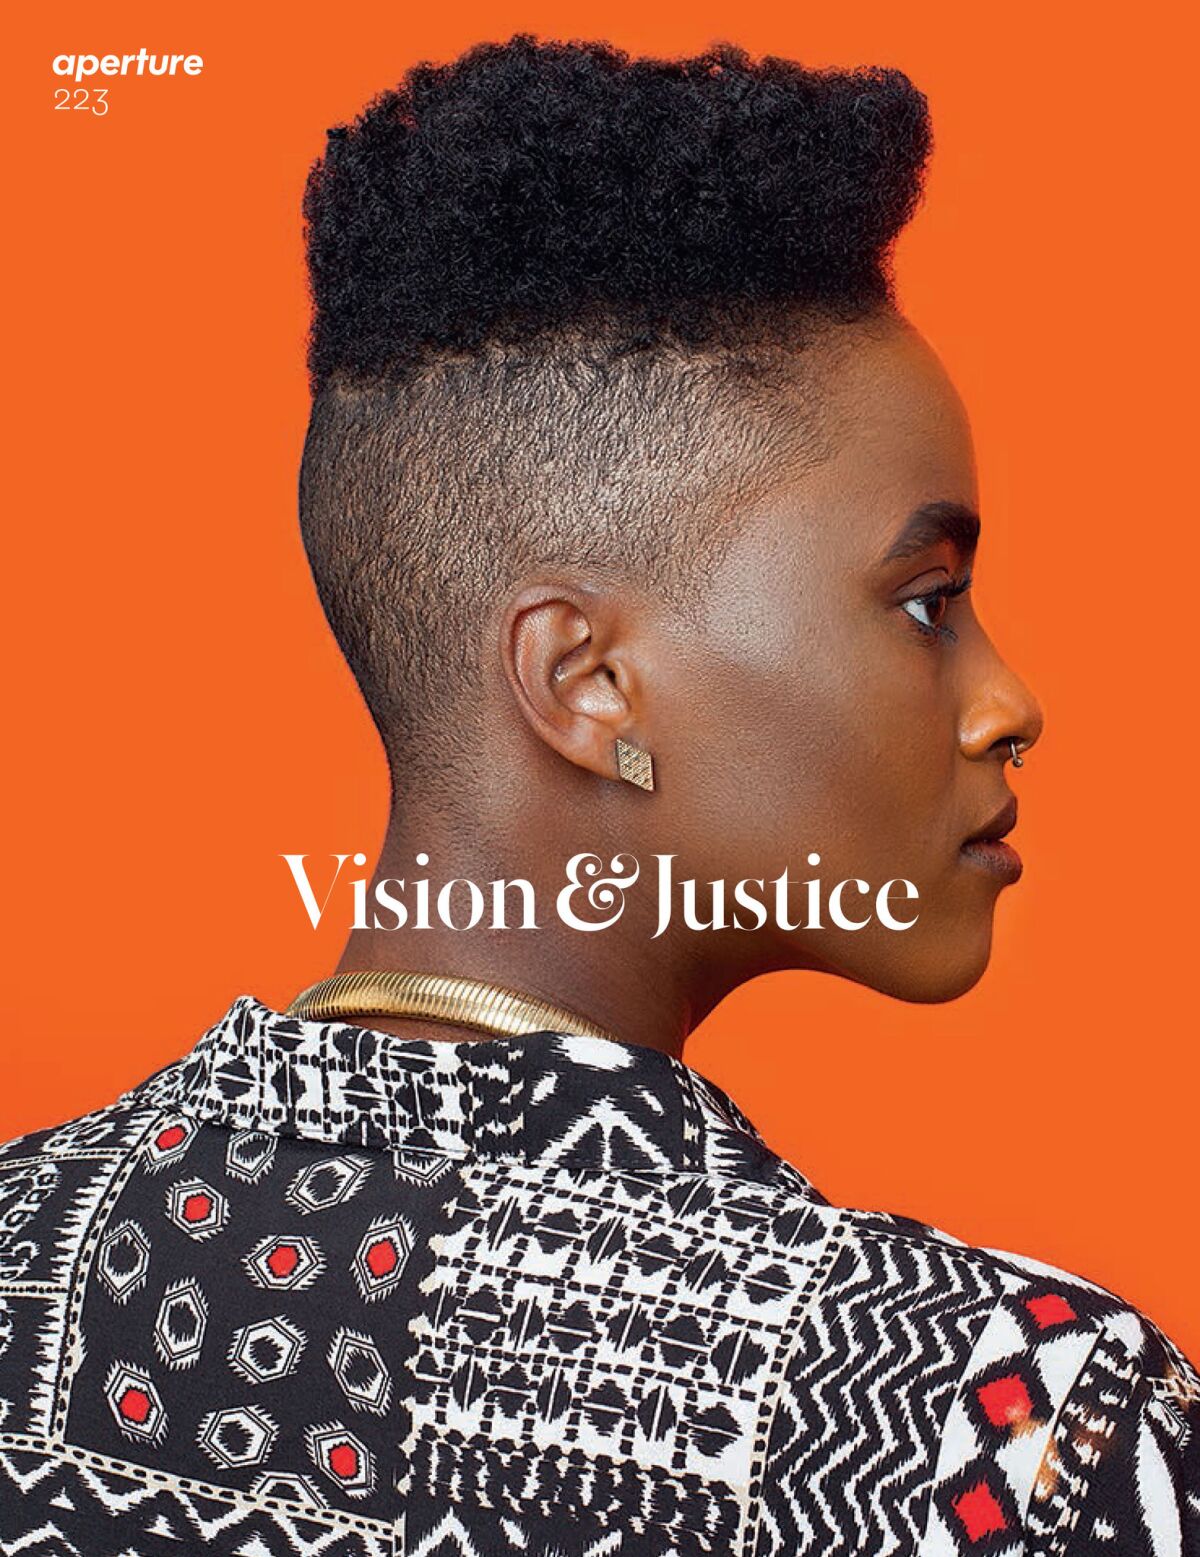 One of two covers of Aperture Magazine's Summer 2016, "Vision & Justice" issue. Awol Erizku, Untitled (Forces of Nature #1), 2014. (Awol Erizku / Vogue.com)